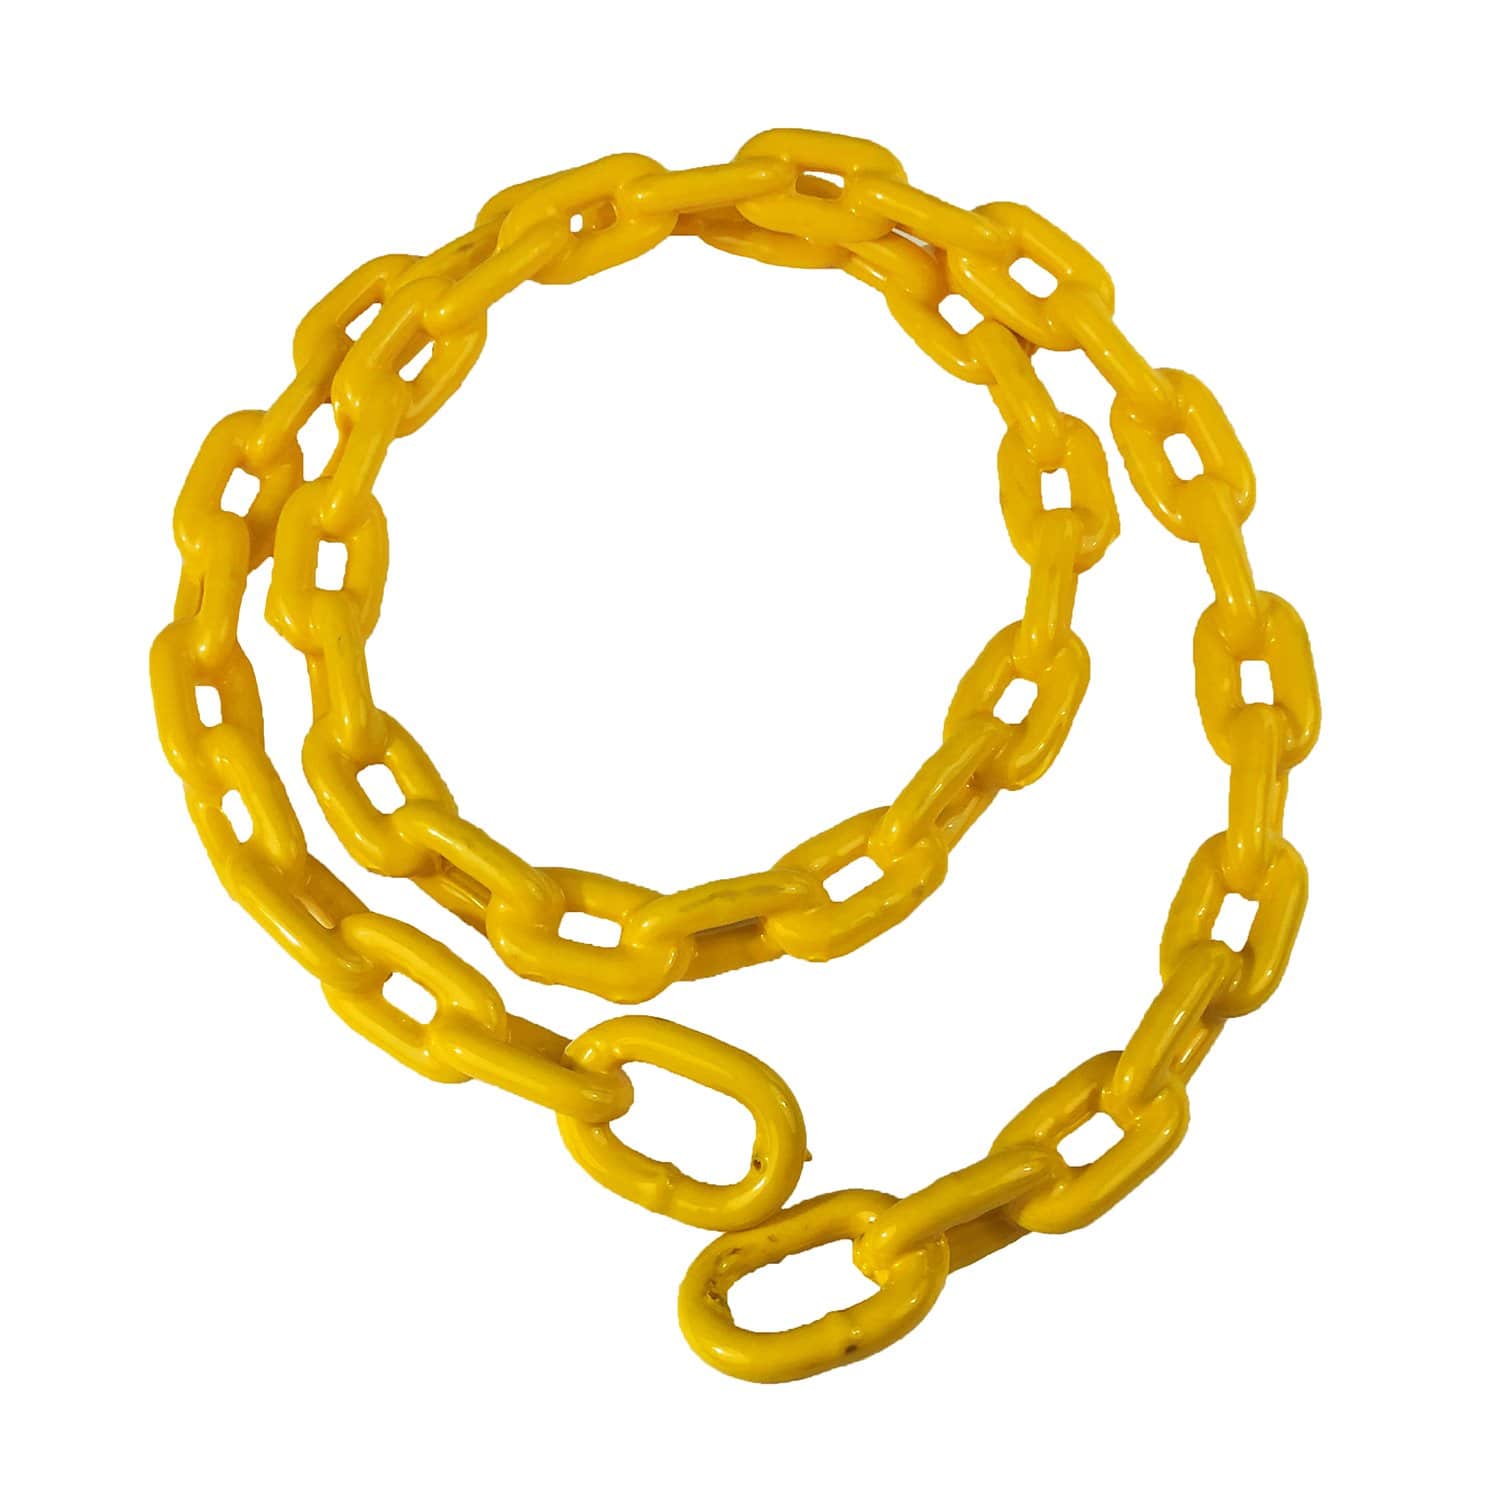 Greenfield 2116-Y 5/16" X 5' Grade 30 Yellow Powder Coated Anchor Chain